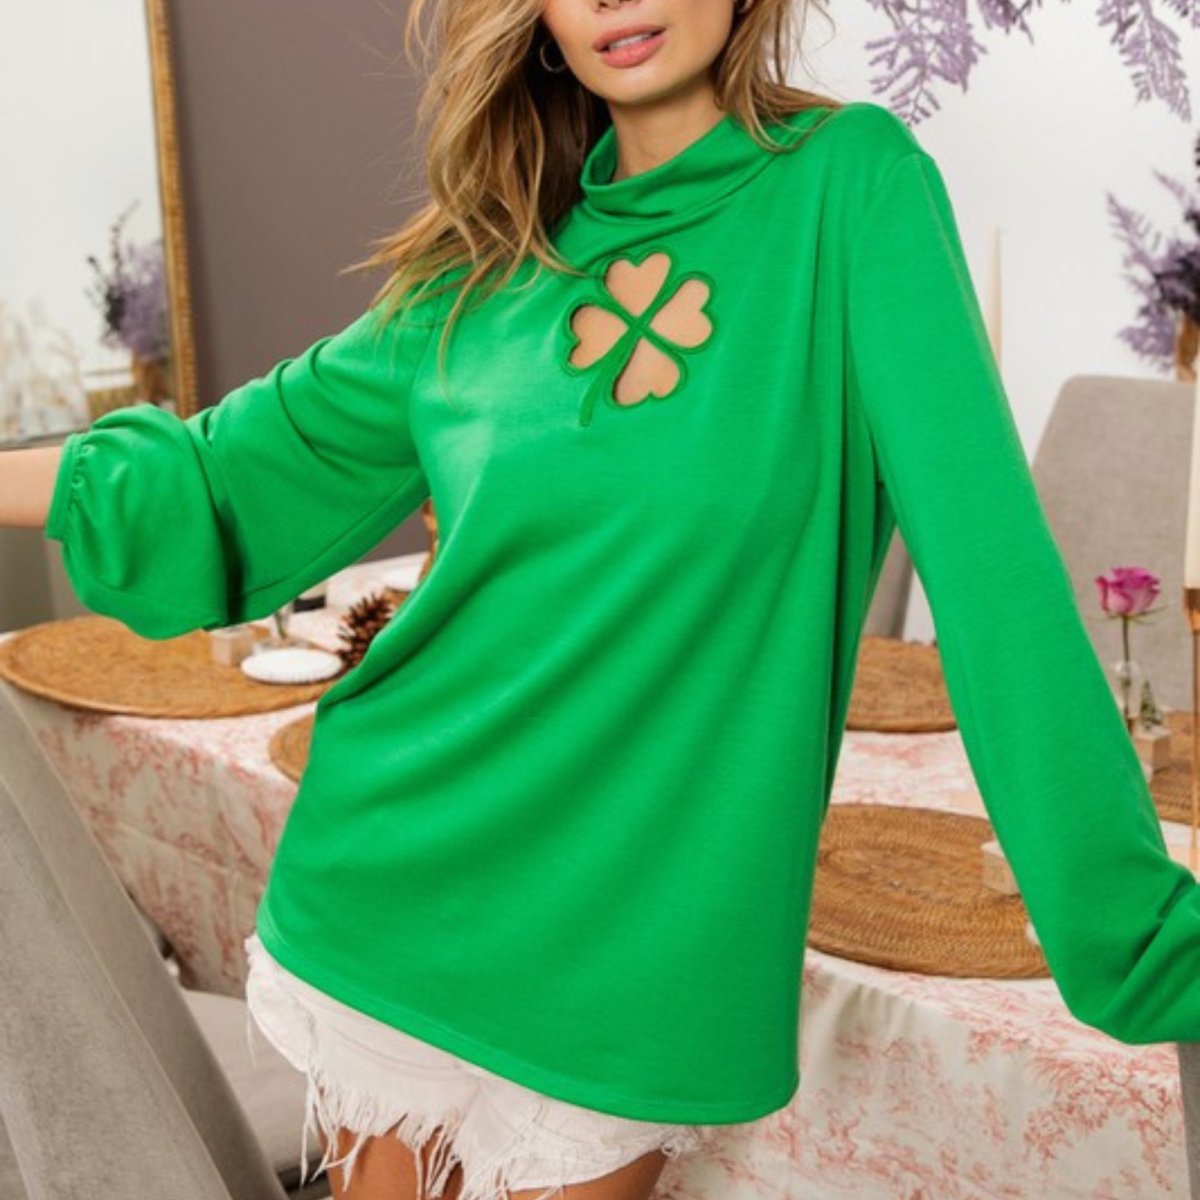 Ft Front Clover Cut Out Mock Neck Puff Sleeves Top - Mardi Gras Apparel